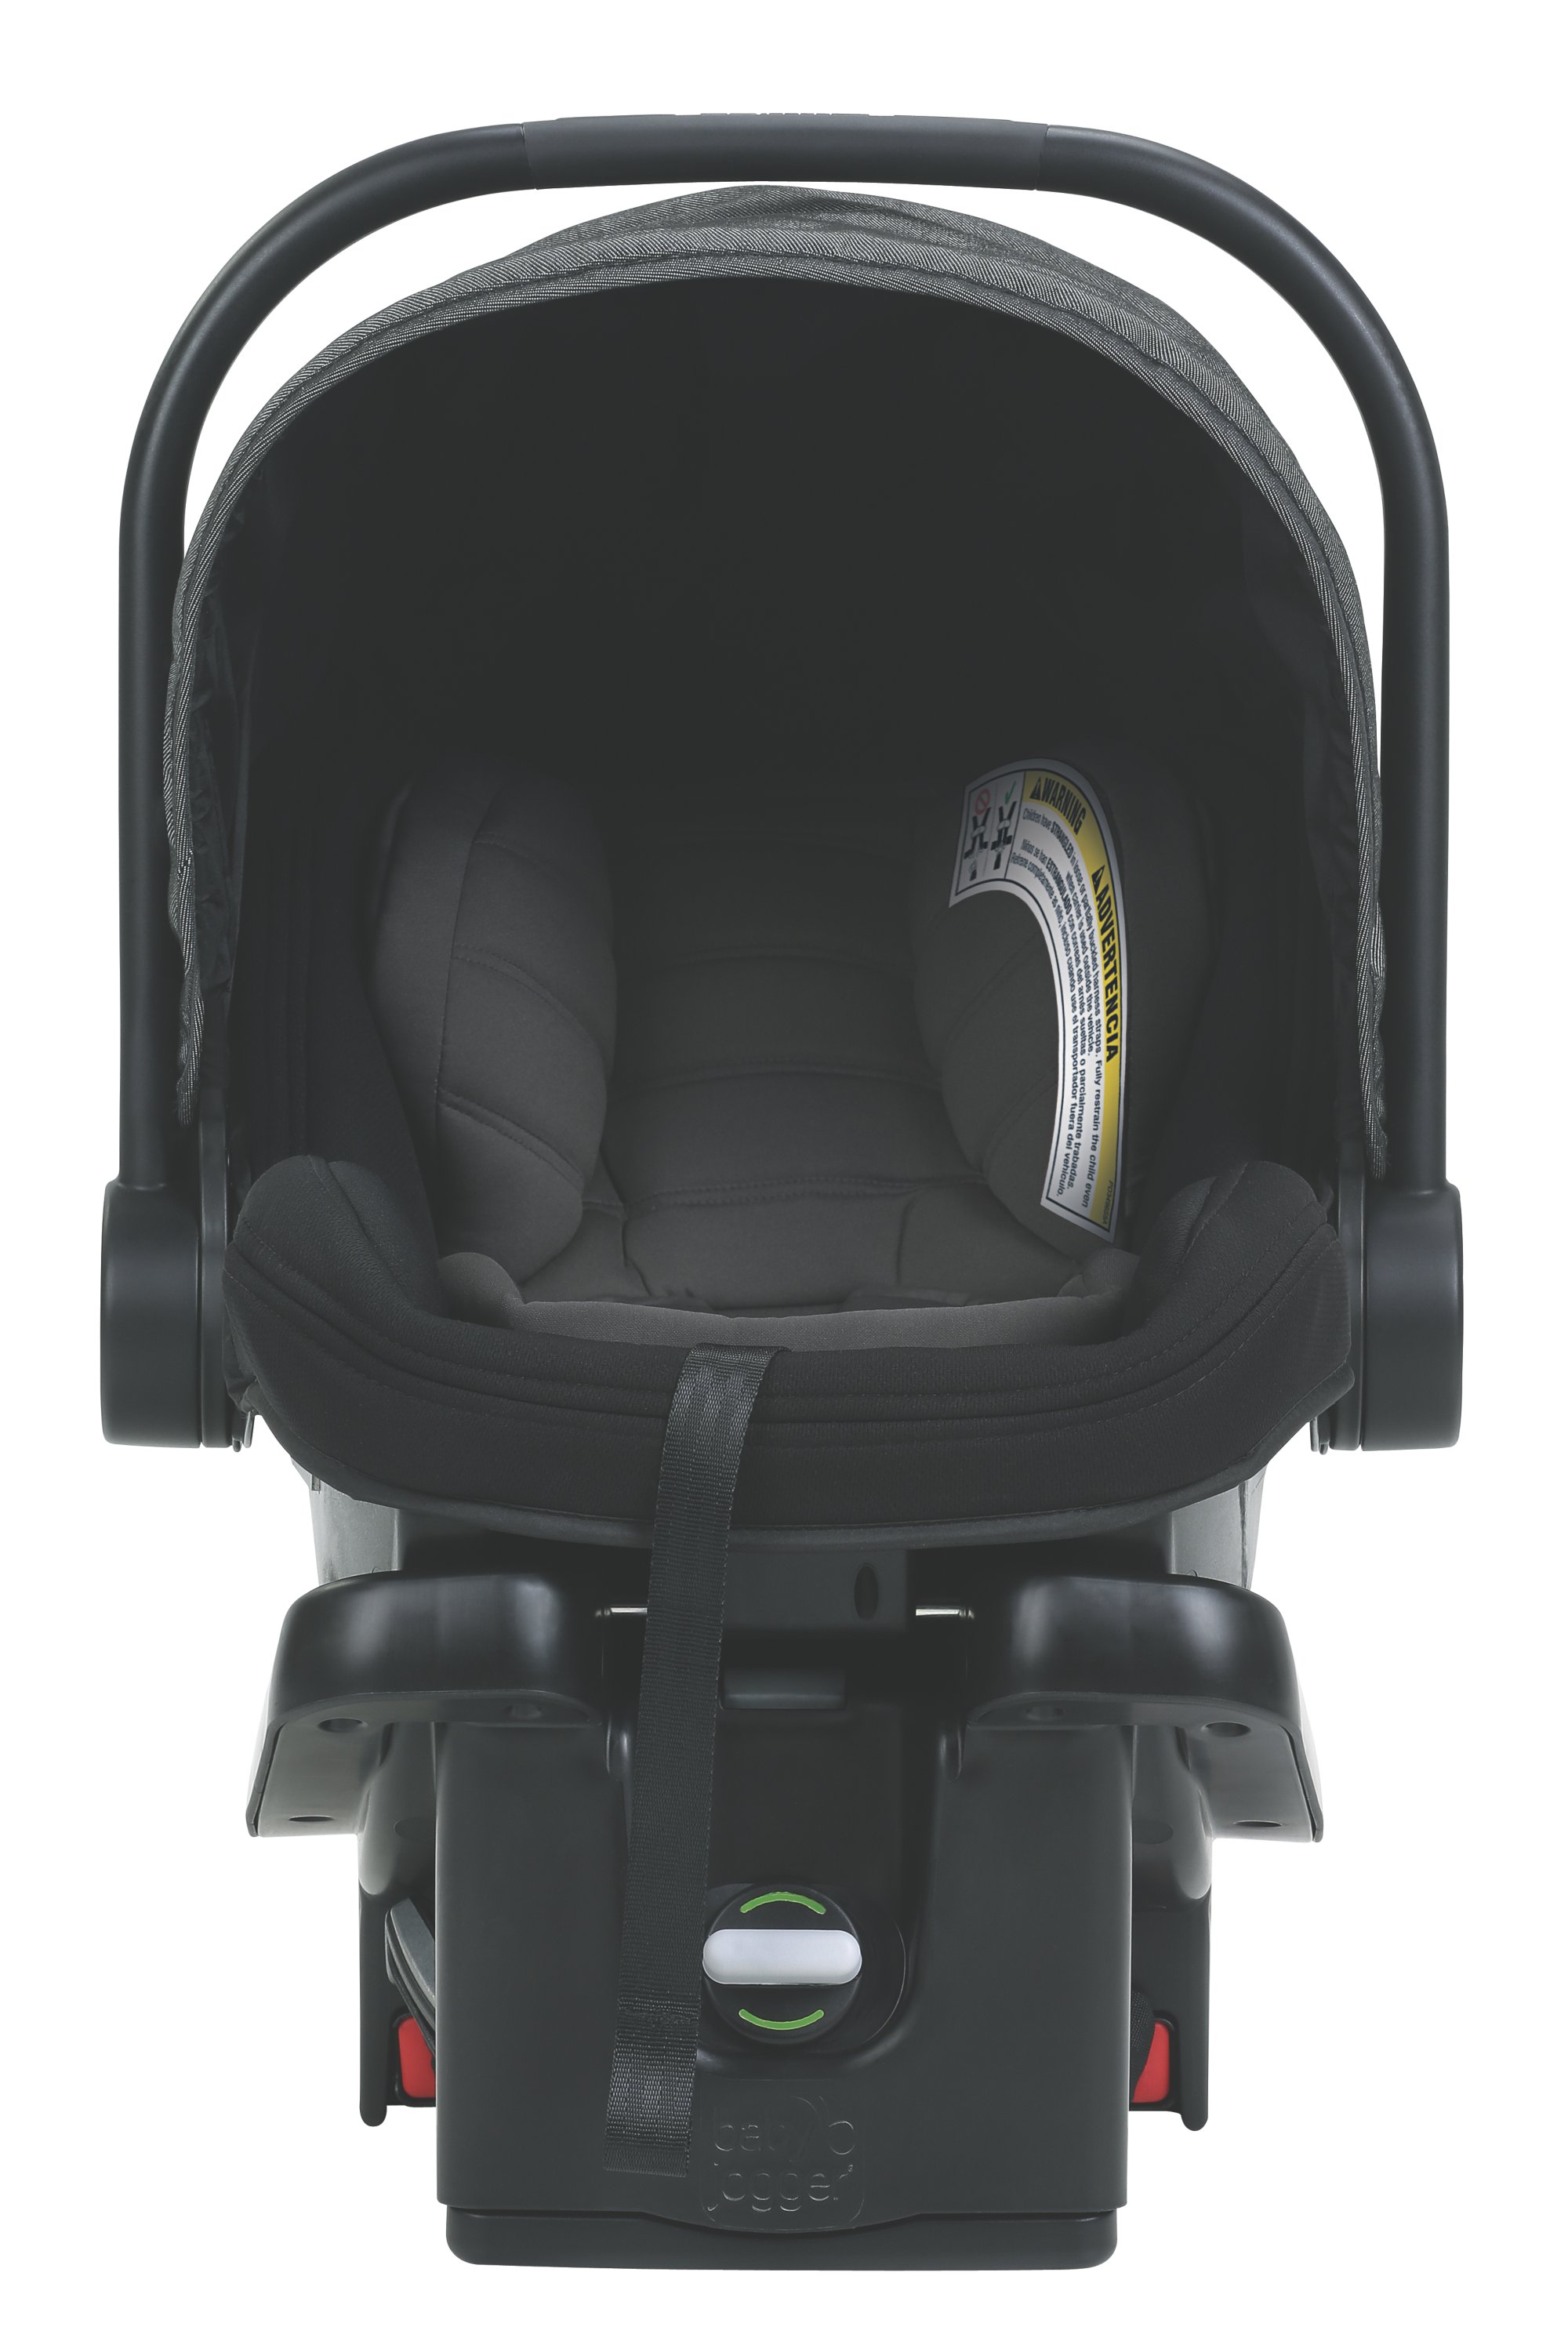 baby jogger city go infant car seat and base